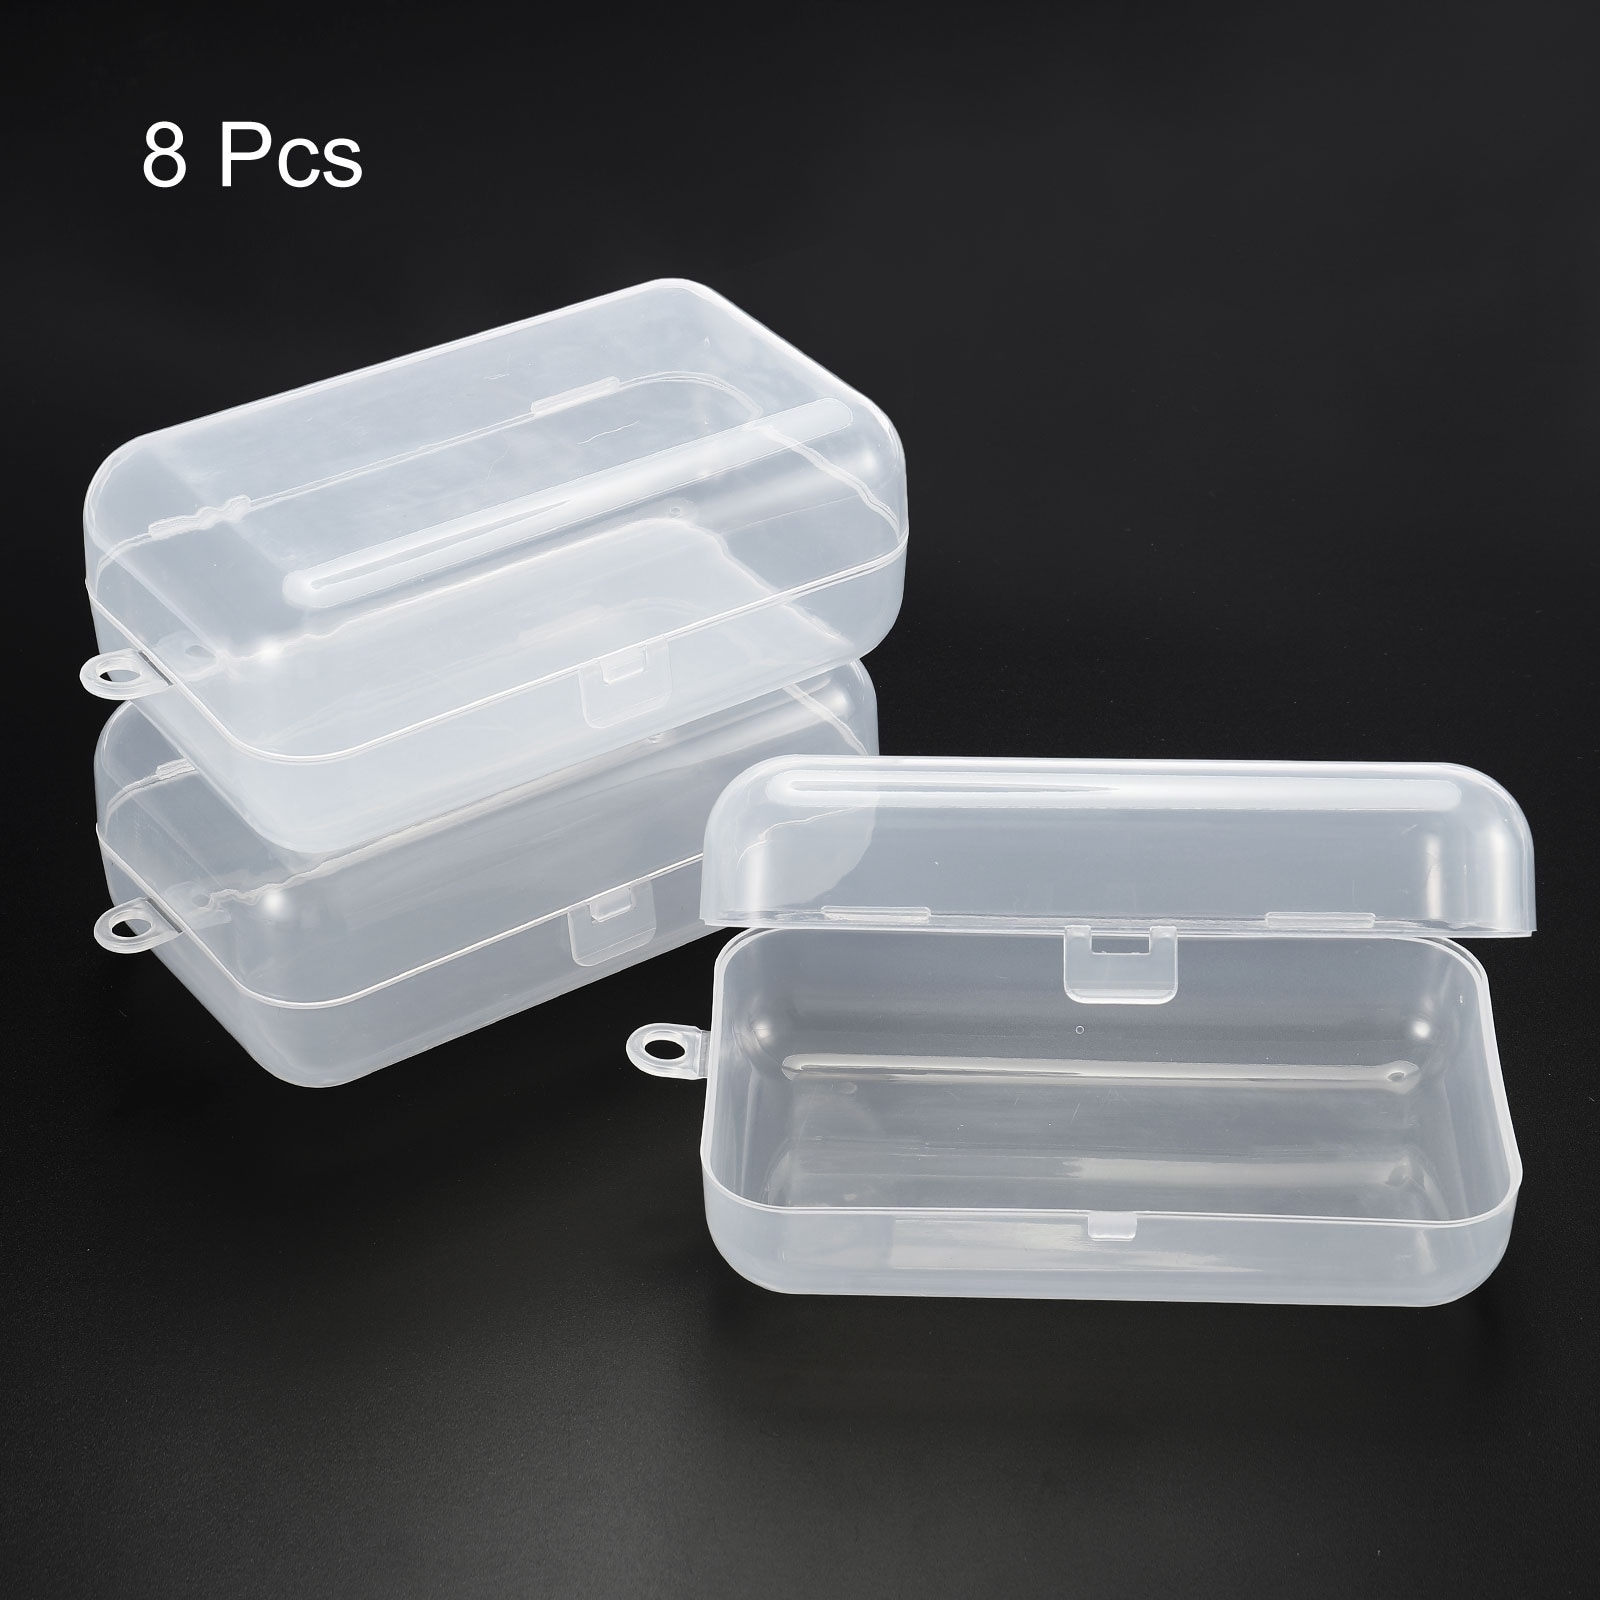 Unique Bargains Storage Containers with Hinged Lid Plastic Rectangle Box for Art Craft - Clear - 127x44x46mm